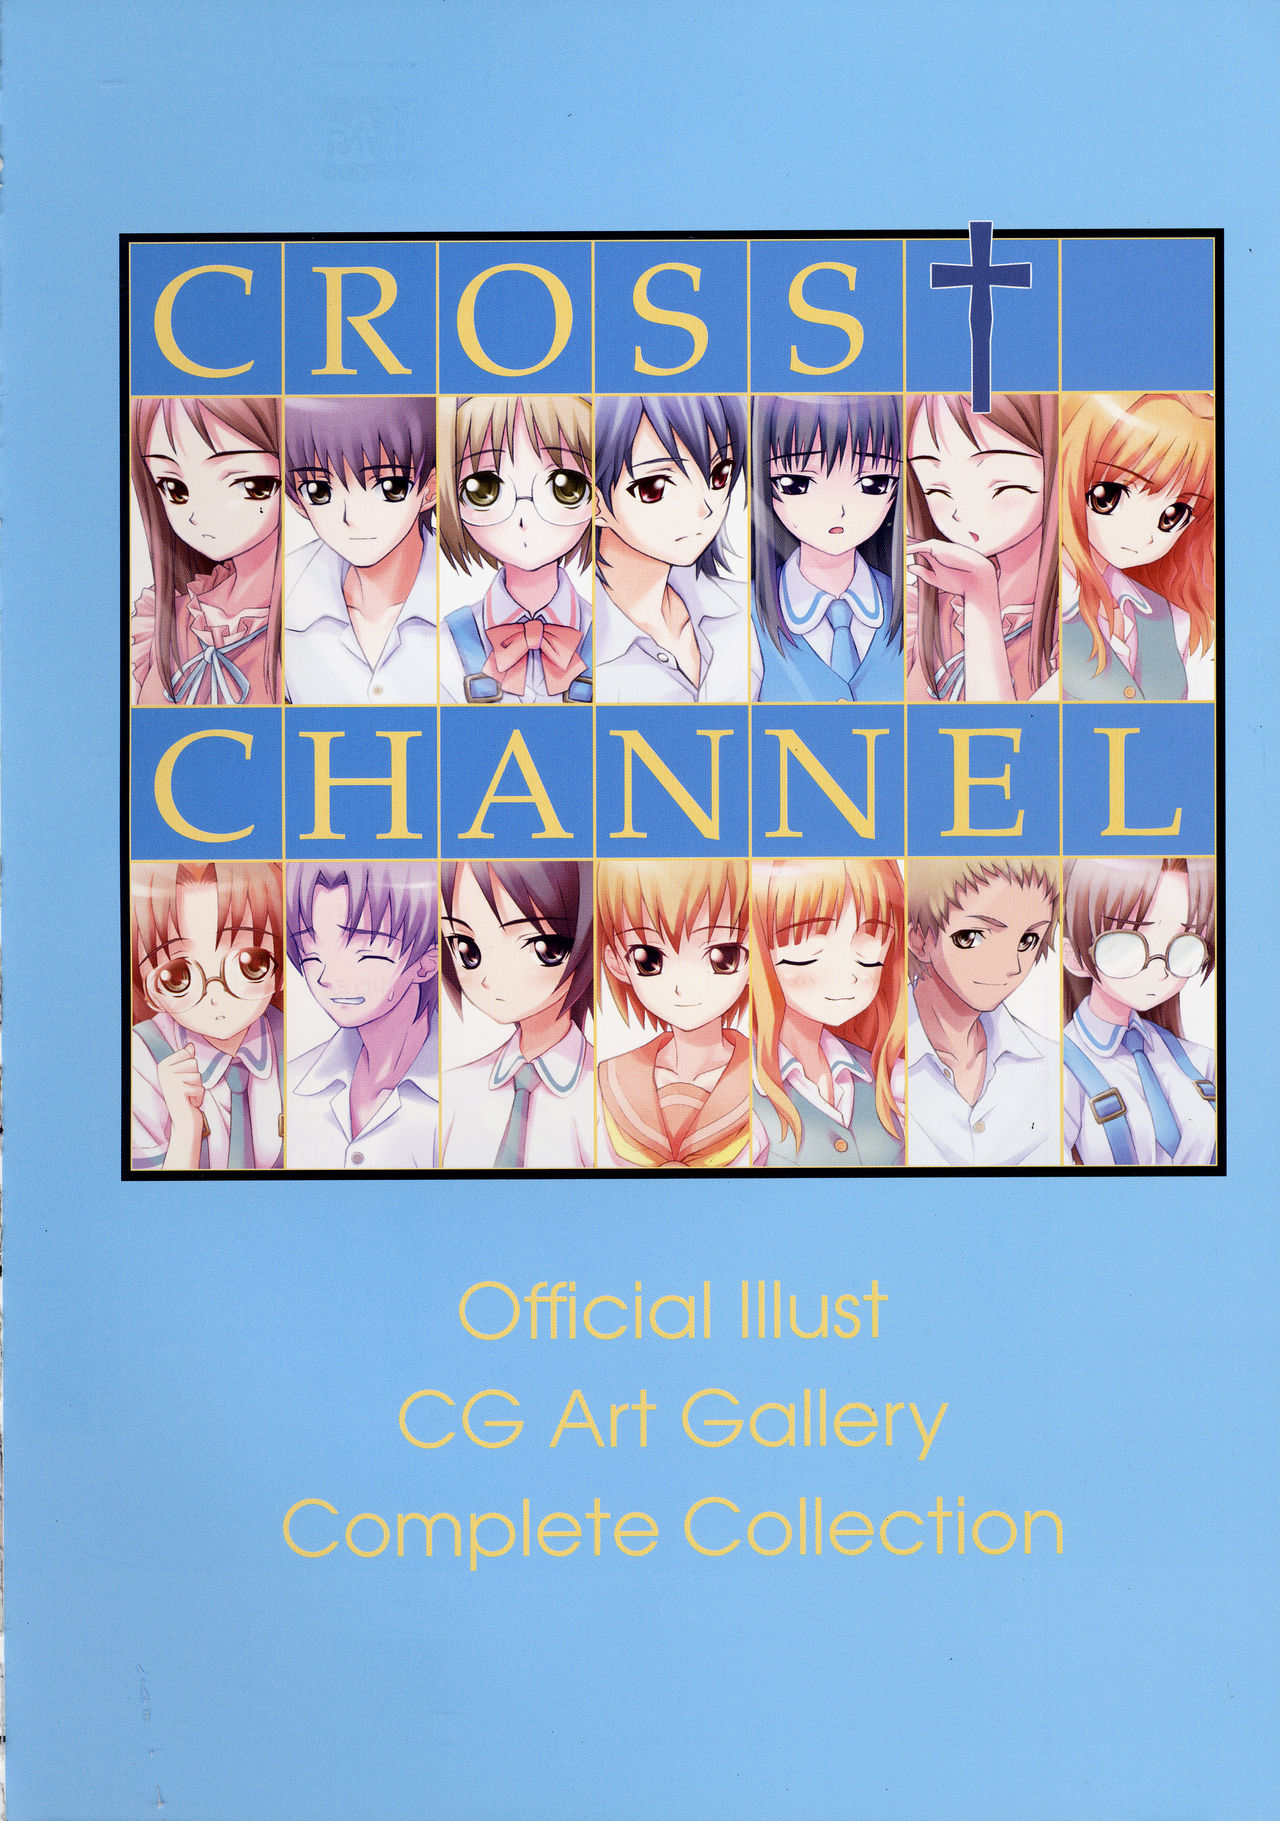 CROSS†CHANNEL Official Setting Materials CROSS†CHANNEL 公式設定資料集